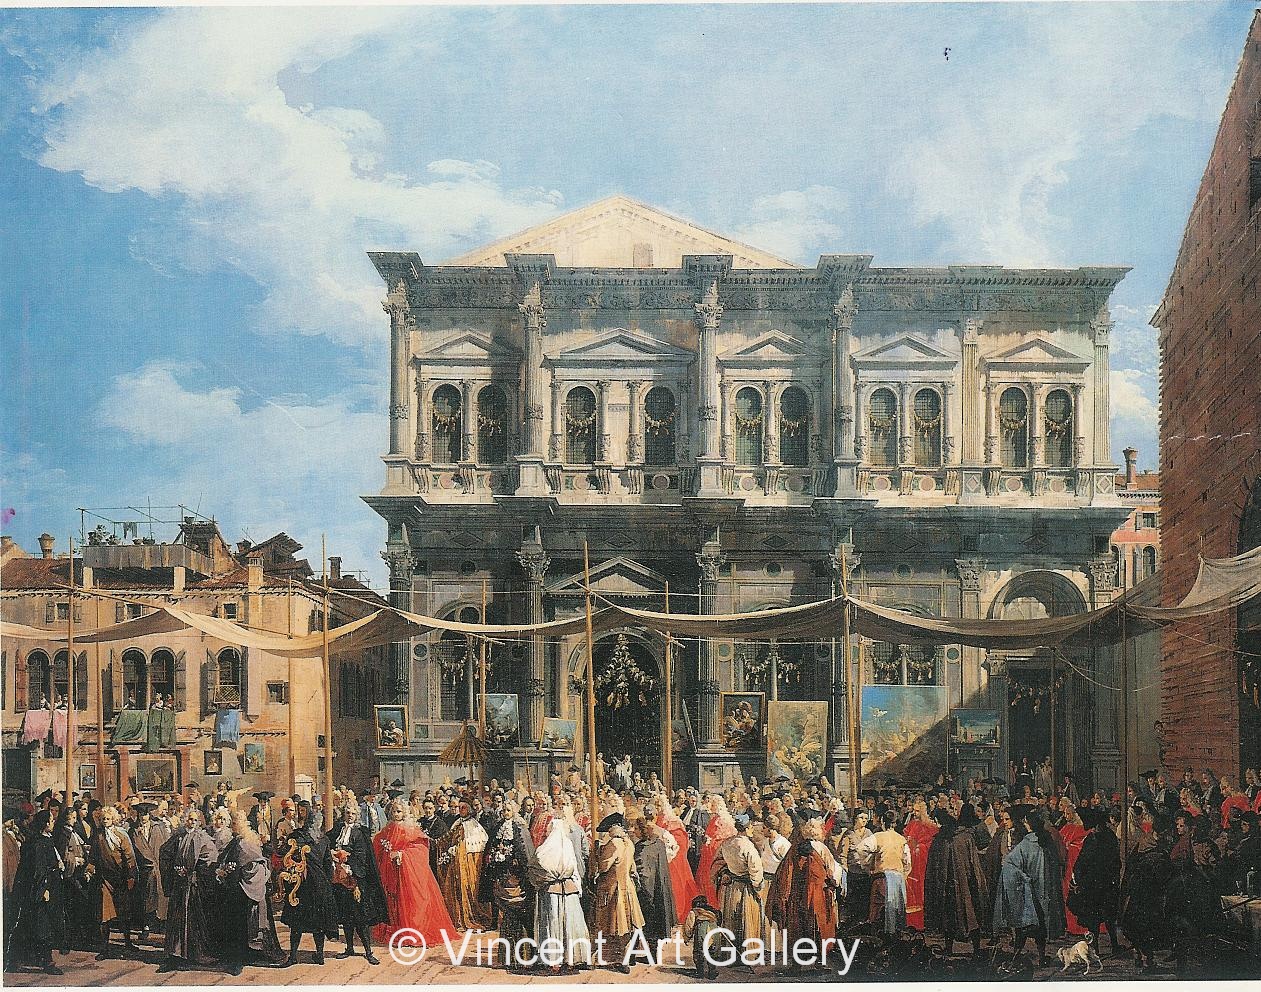 A1018, CANALETTO, Feast of San Rocco